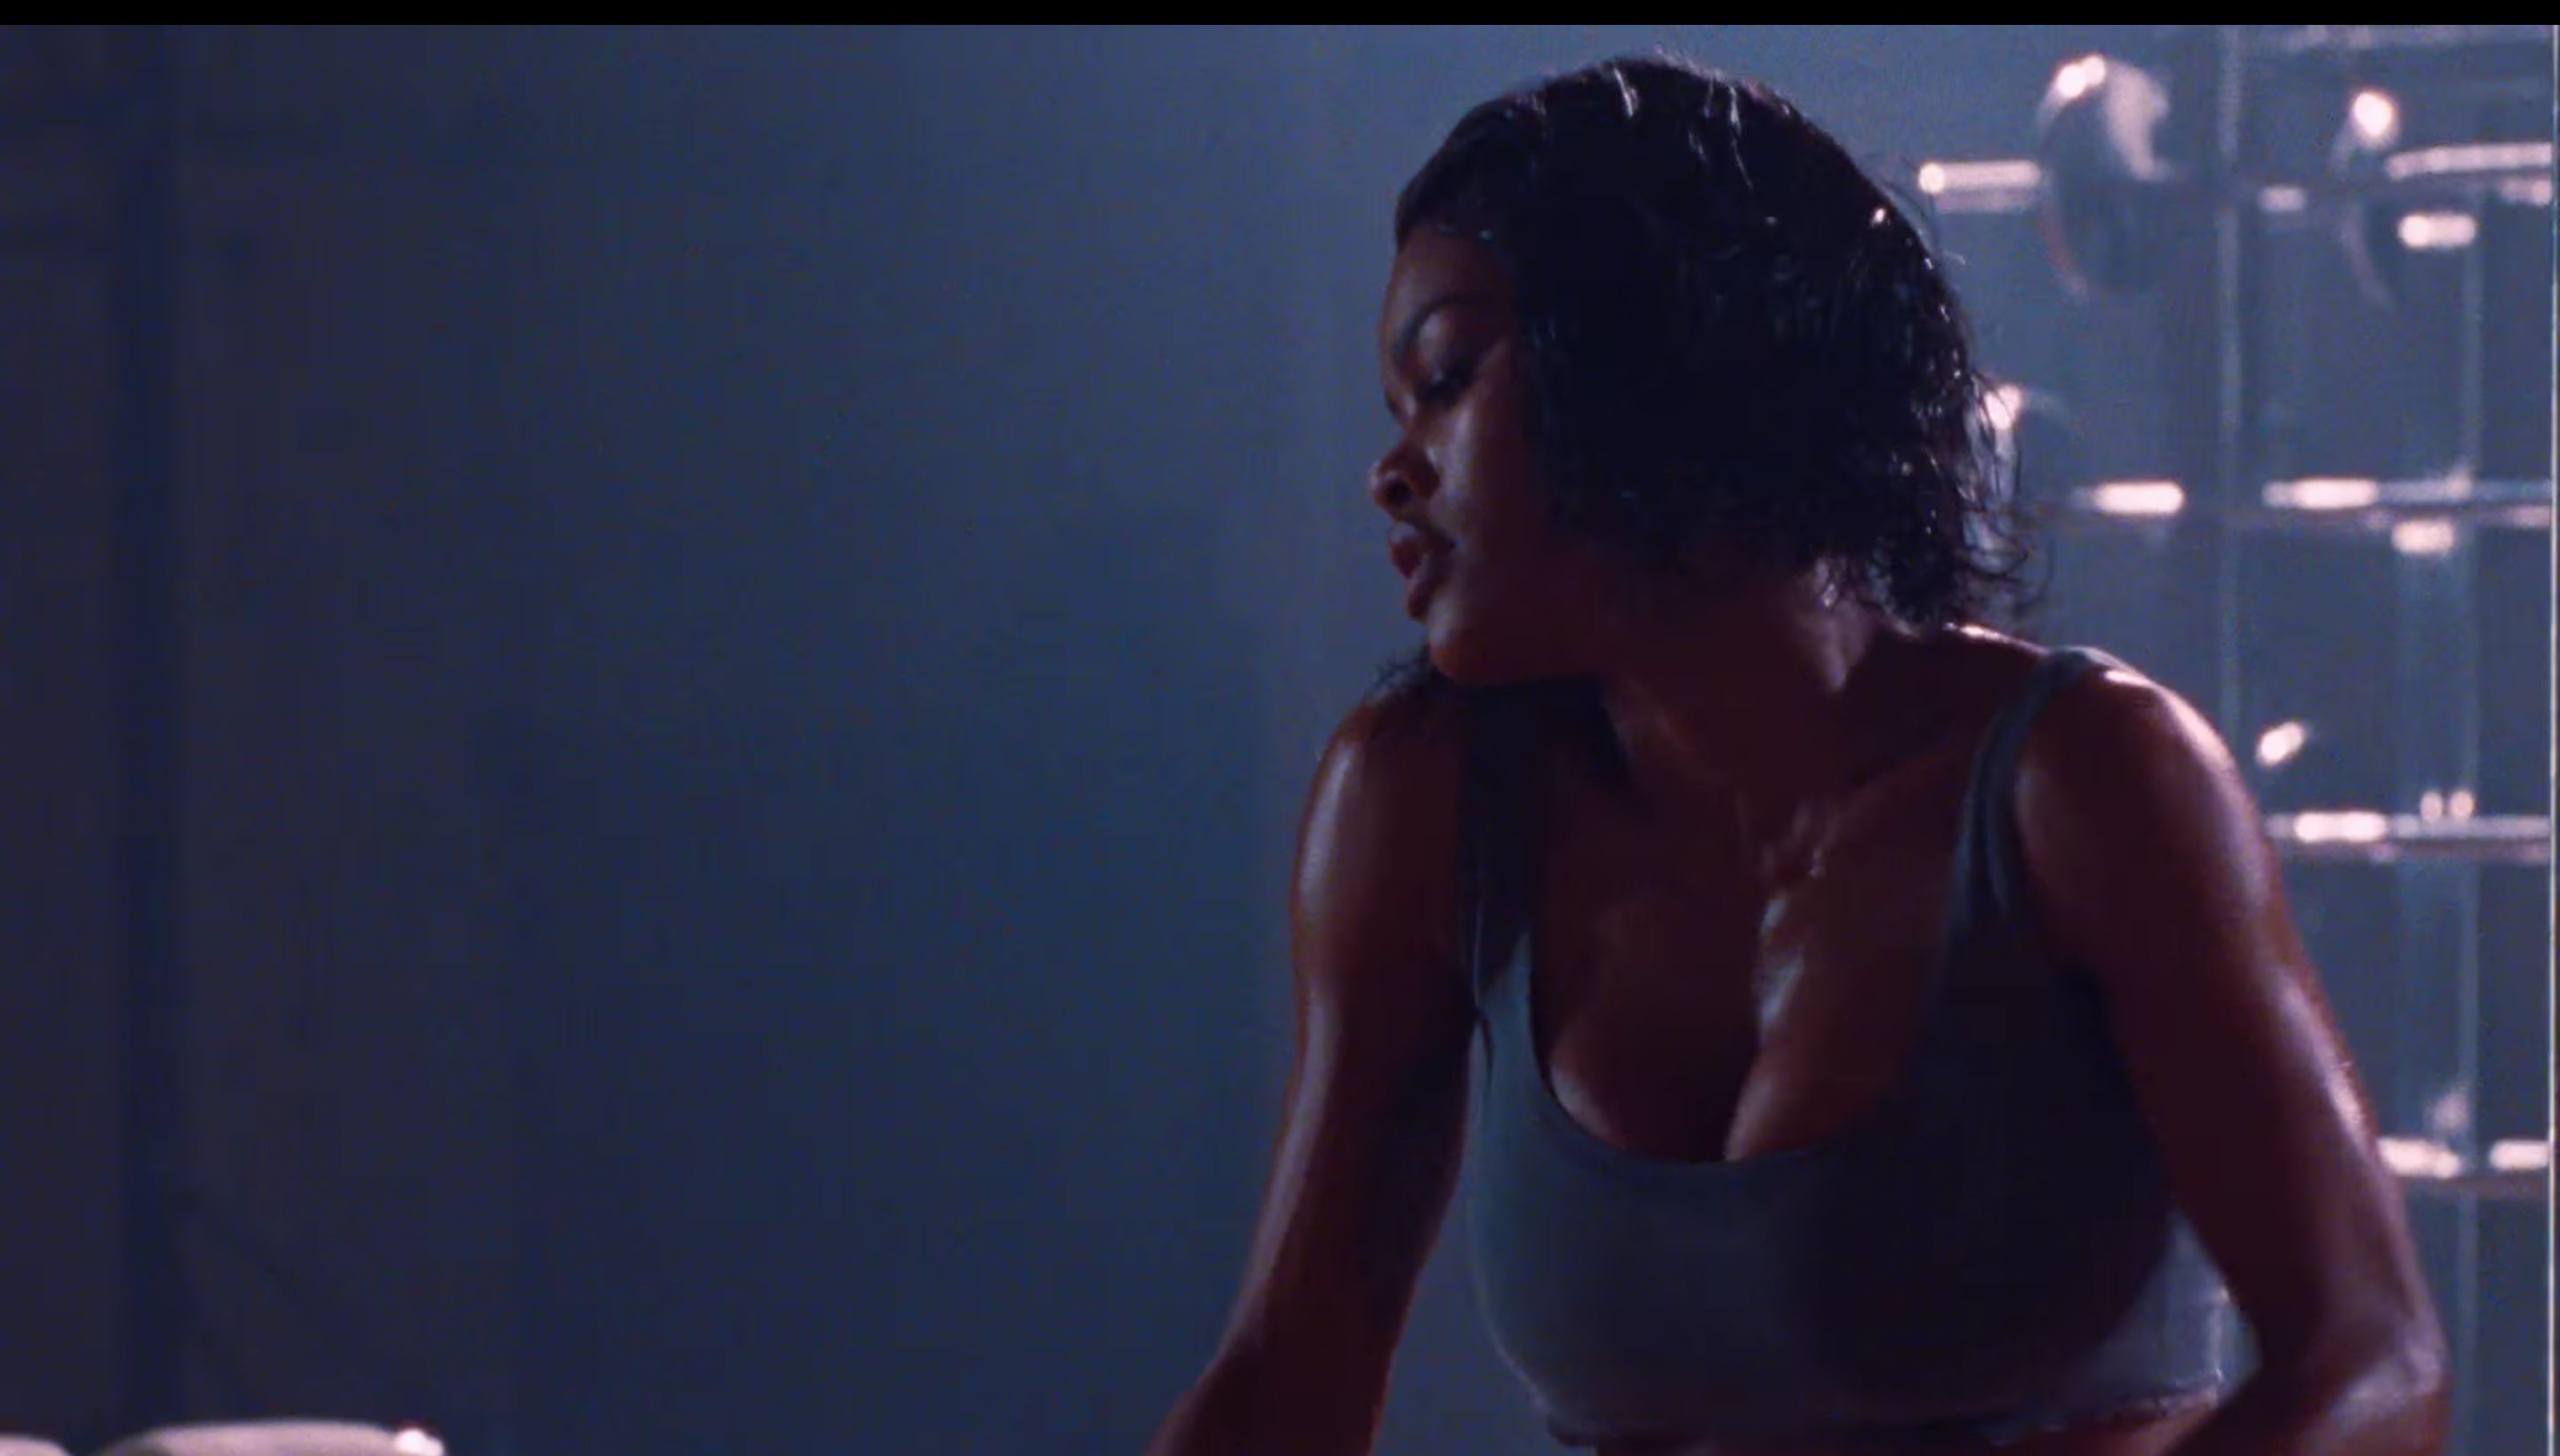 Teyana Taylor packs a punch in Kanye West 'Fade' music video